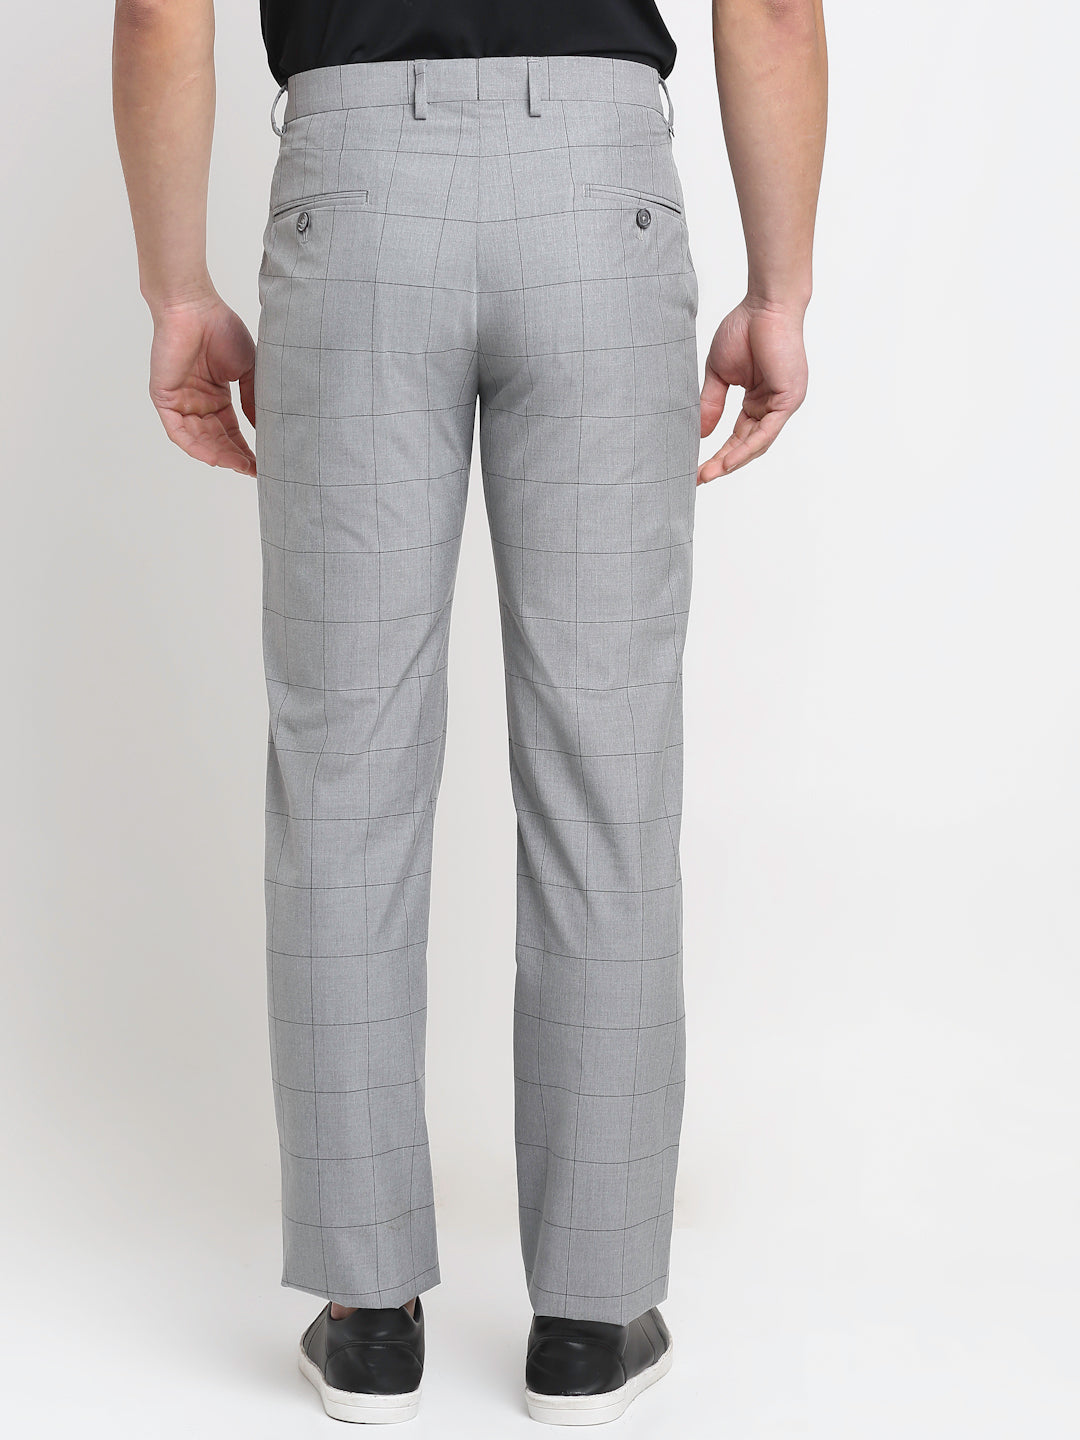 Mens Summer Trousers Grey Check Blue Black Tailored Fit Classic Wedding  Formal: Buy Online - Happy Gentleman United States